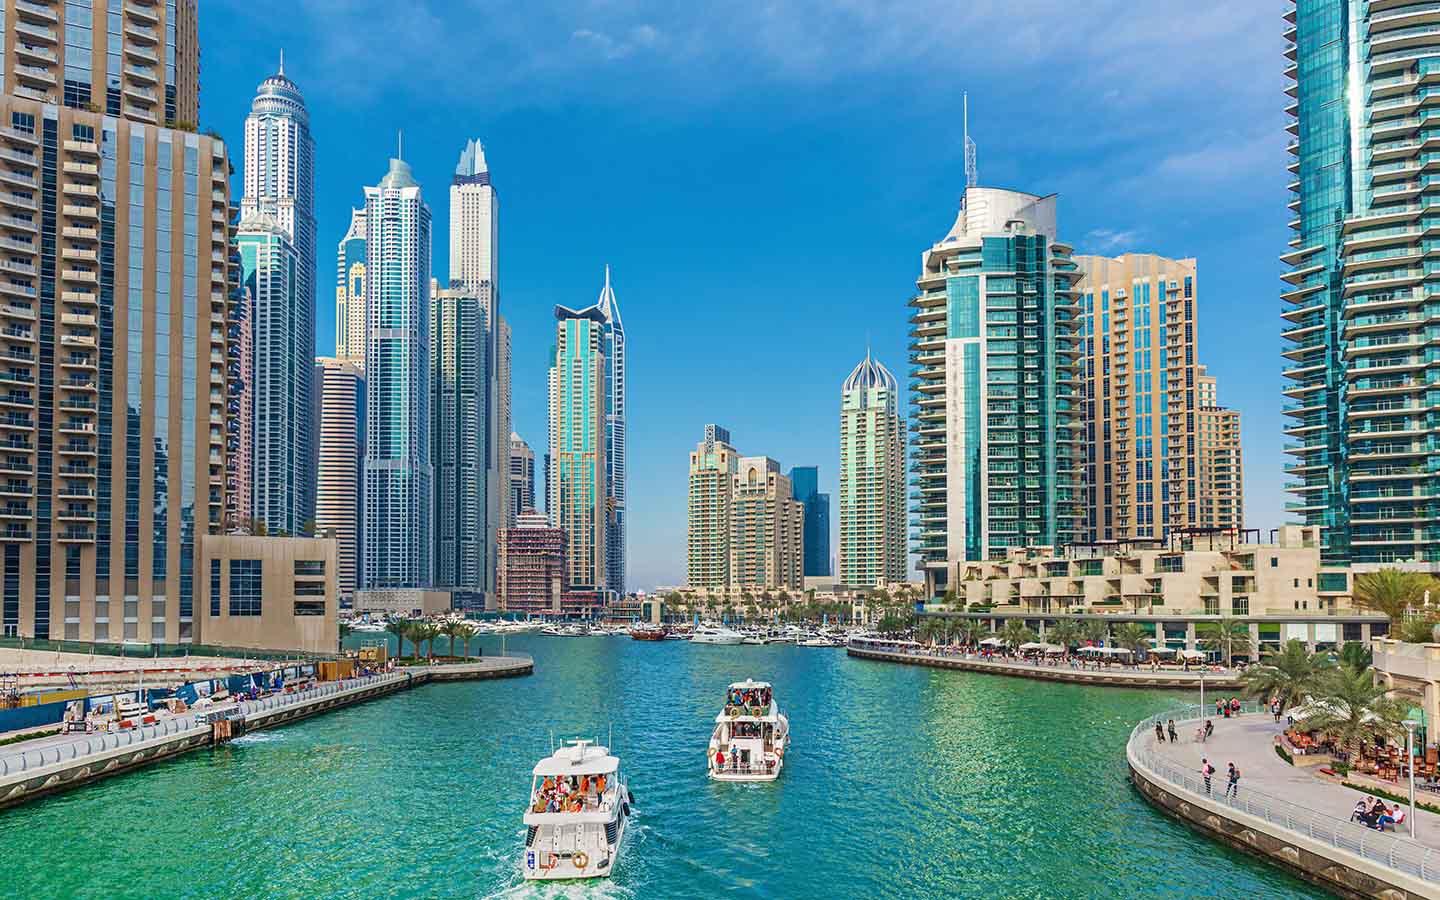 dubai marina area has a variety of luxury apartments available for rent